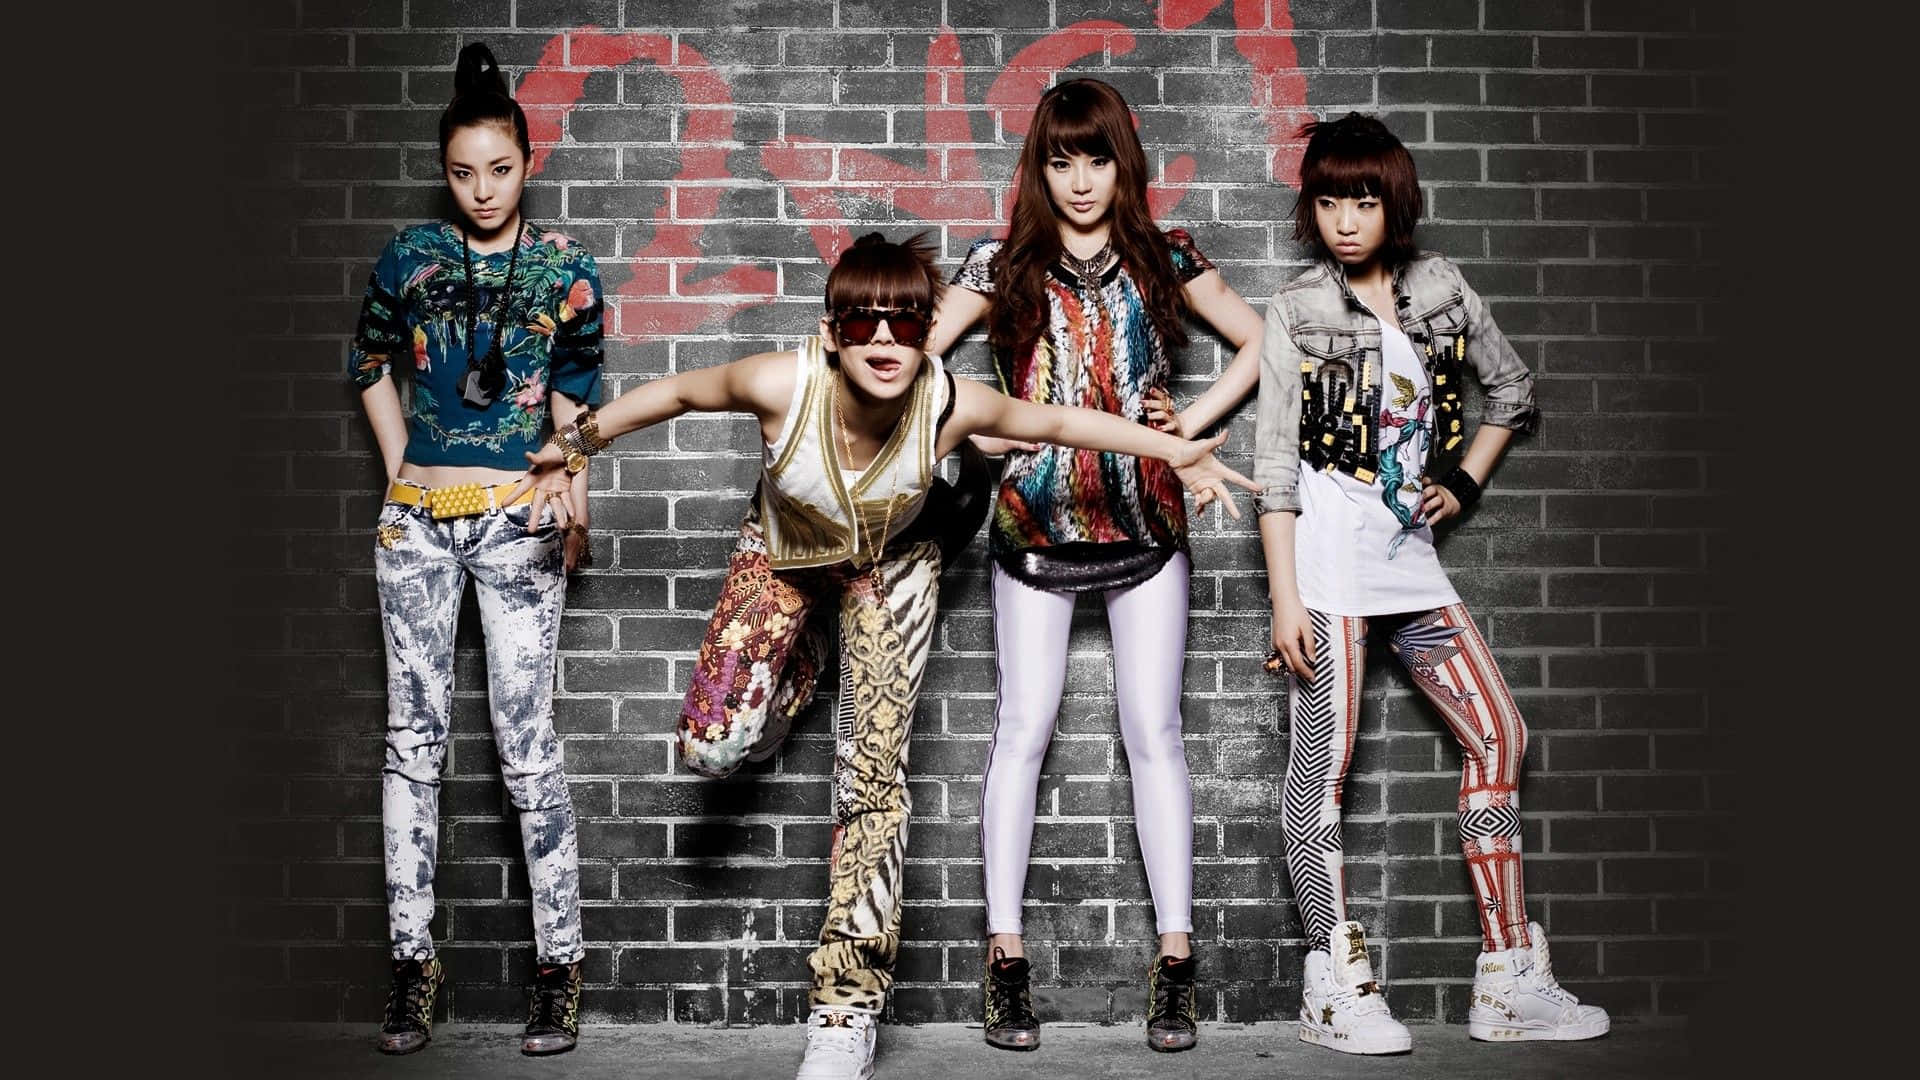 A unique, abstract portrait of the band 2NE1